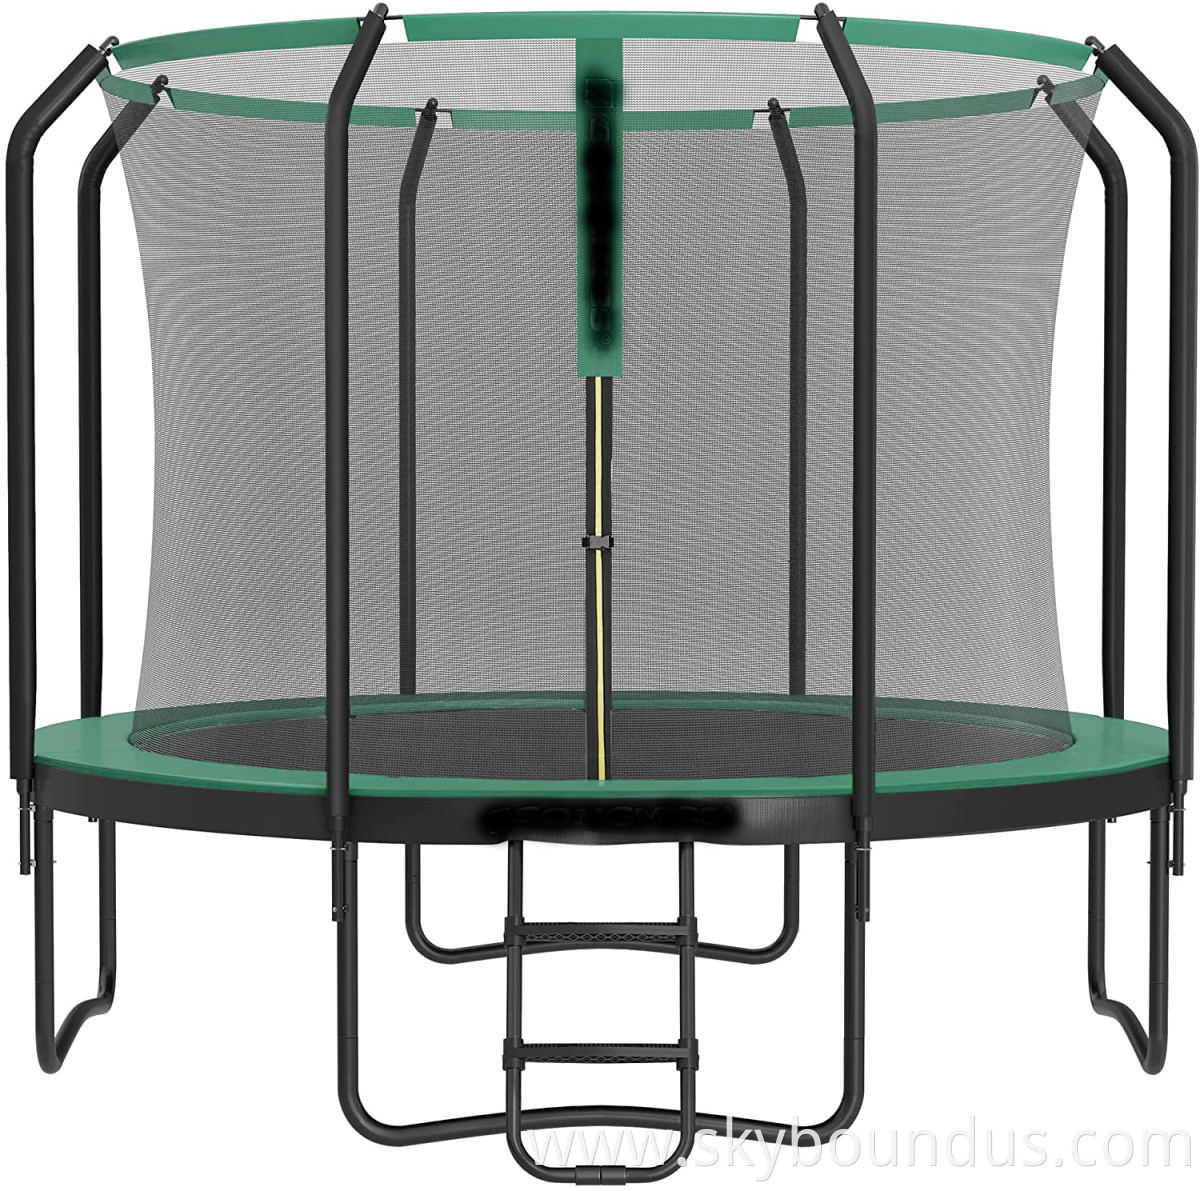 Trampoline, 366 cm Diameter Trampoline with 8 Poles, Outdoor Trampoline for Fitness and the Garden with All-Round Safety Net